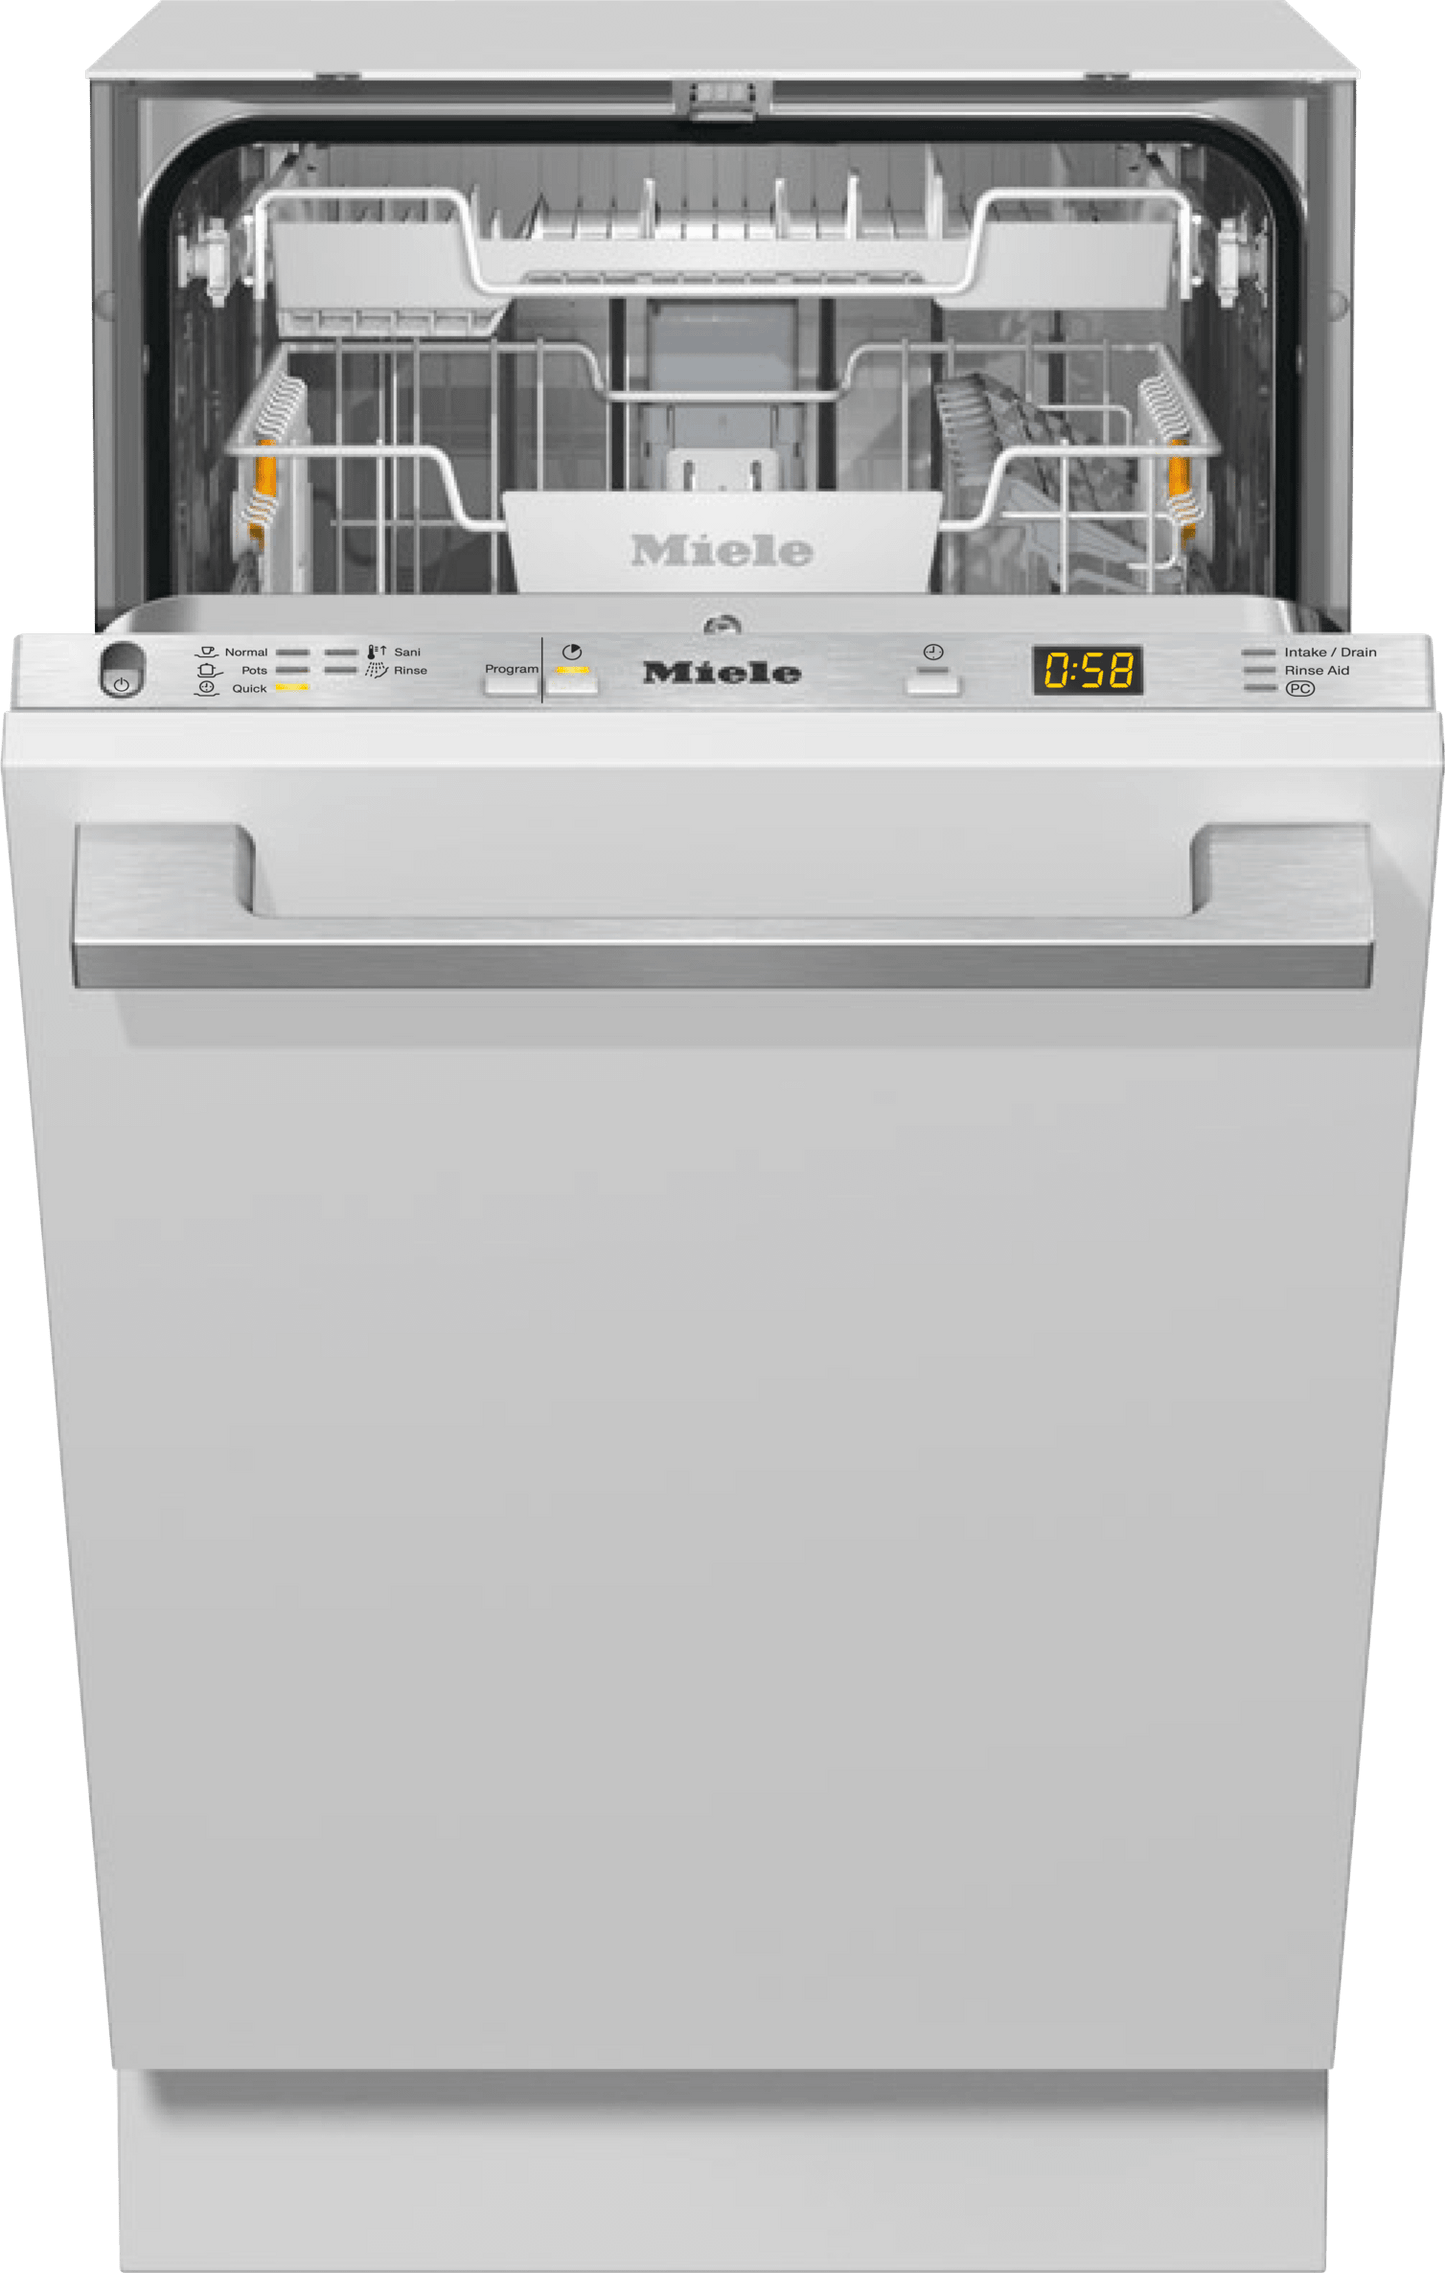 Miele G5482SCVISLSTAINLESSSTEEL G 5482 Scvi Sl - Fully Integrated Dishwasher, 18" (45 Cm) In Tried-And-Tested Miele Quality At An Affordable Entry-Level Price.